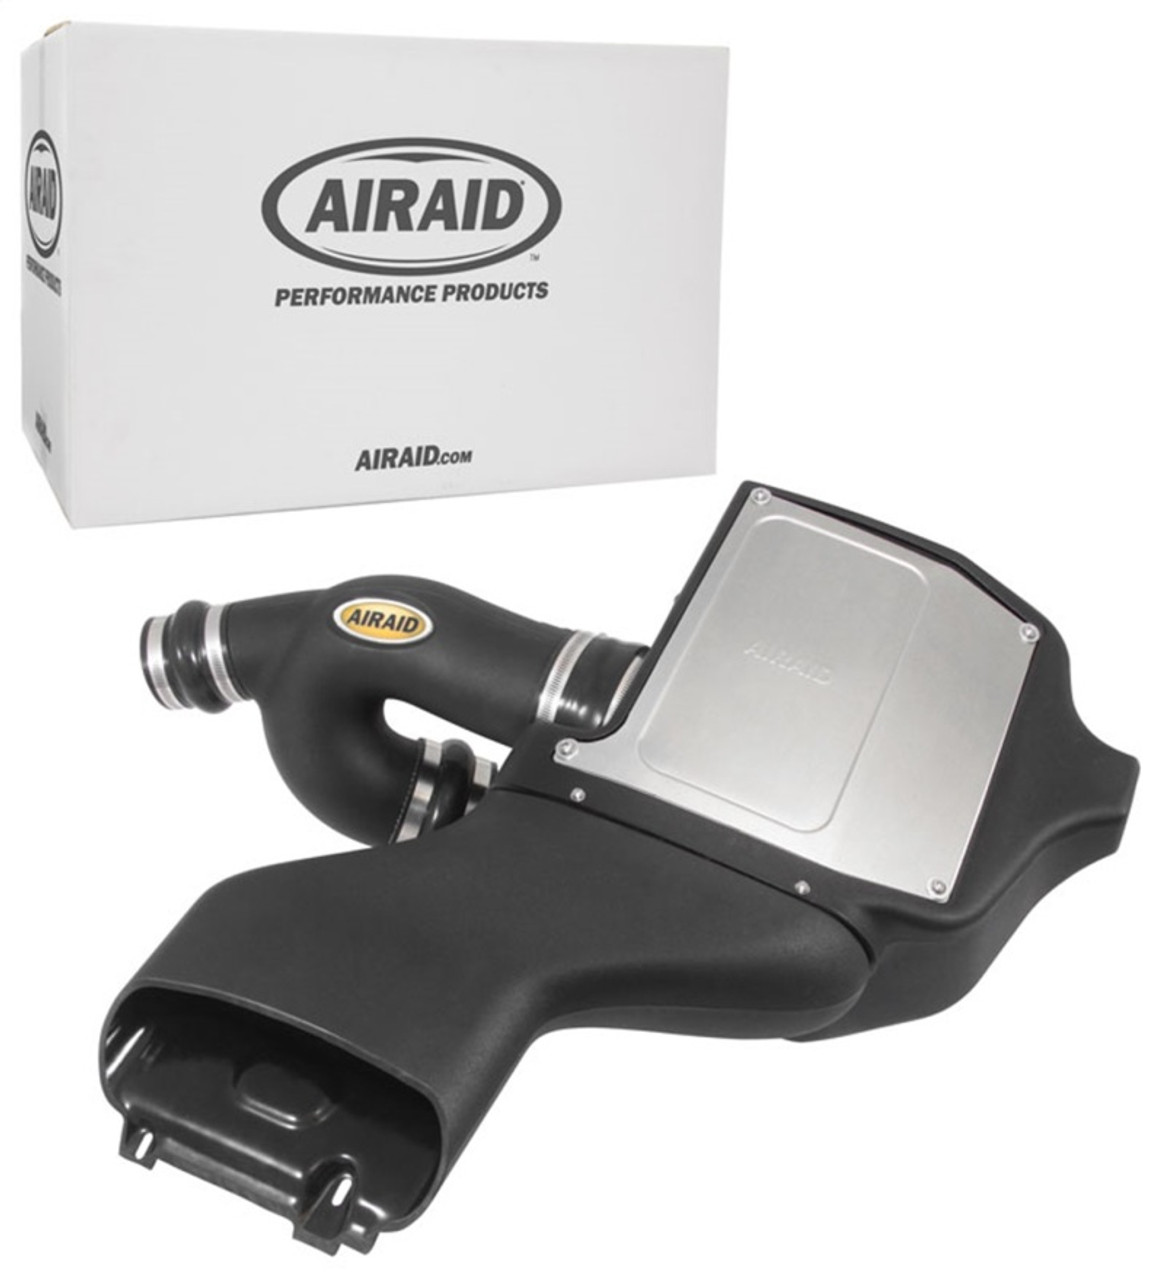 Airaid 17-18 Ford F-150 3.5L V6 F/I Cold Air Intake System w/ Red Media  400-336 Carroll Shelby Racing